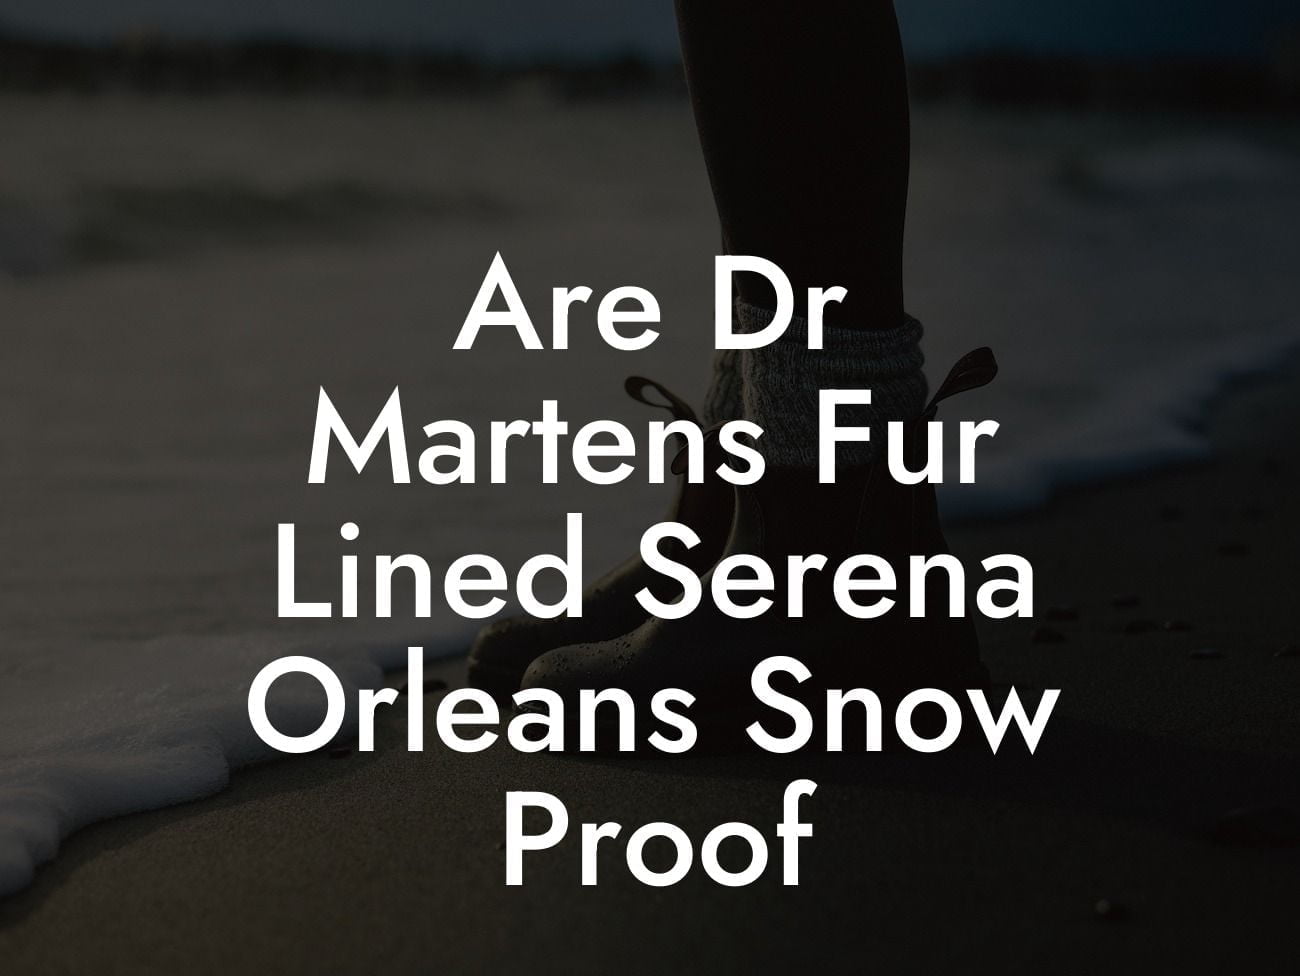 Are Dr Martens Fur Lined Serena Orleans Snow Proof